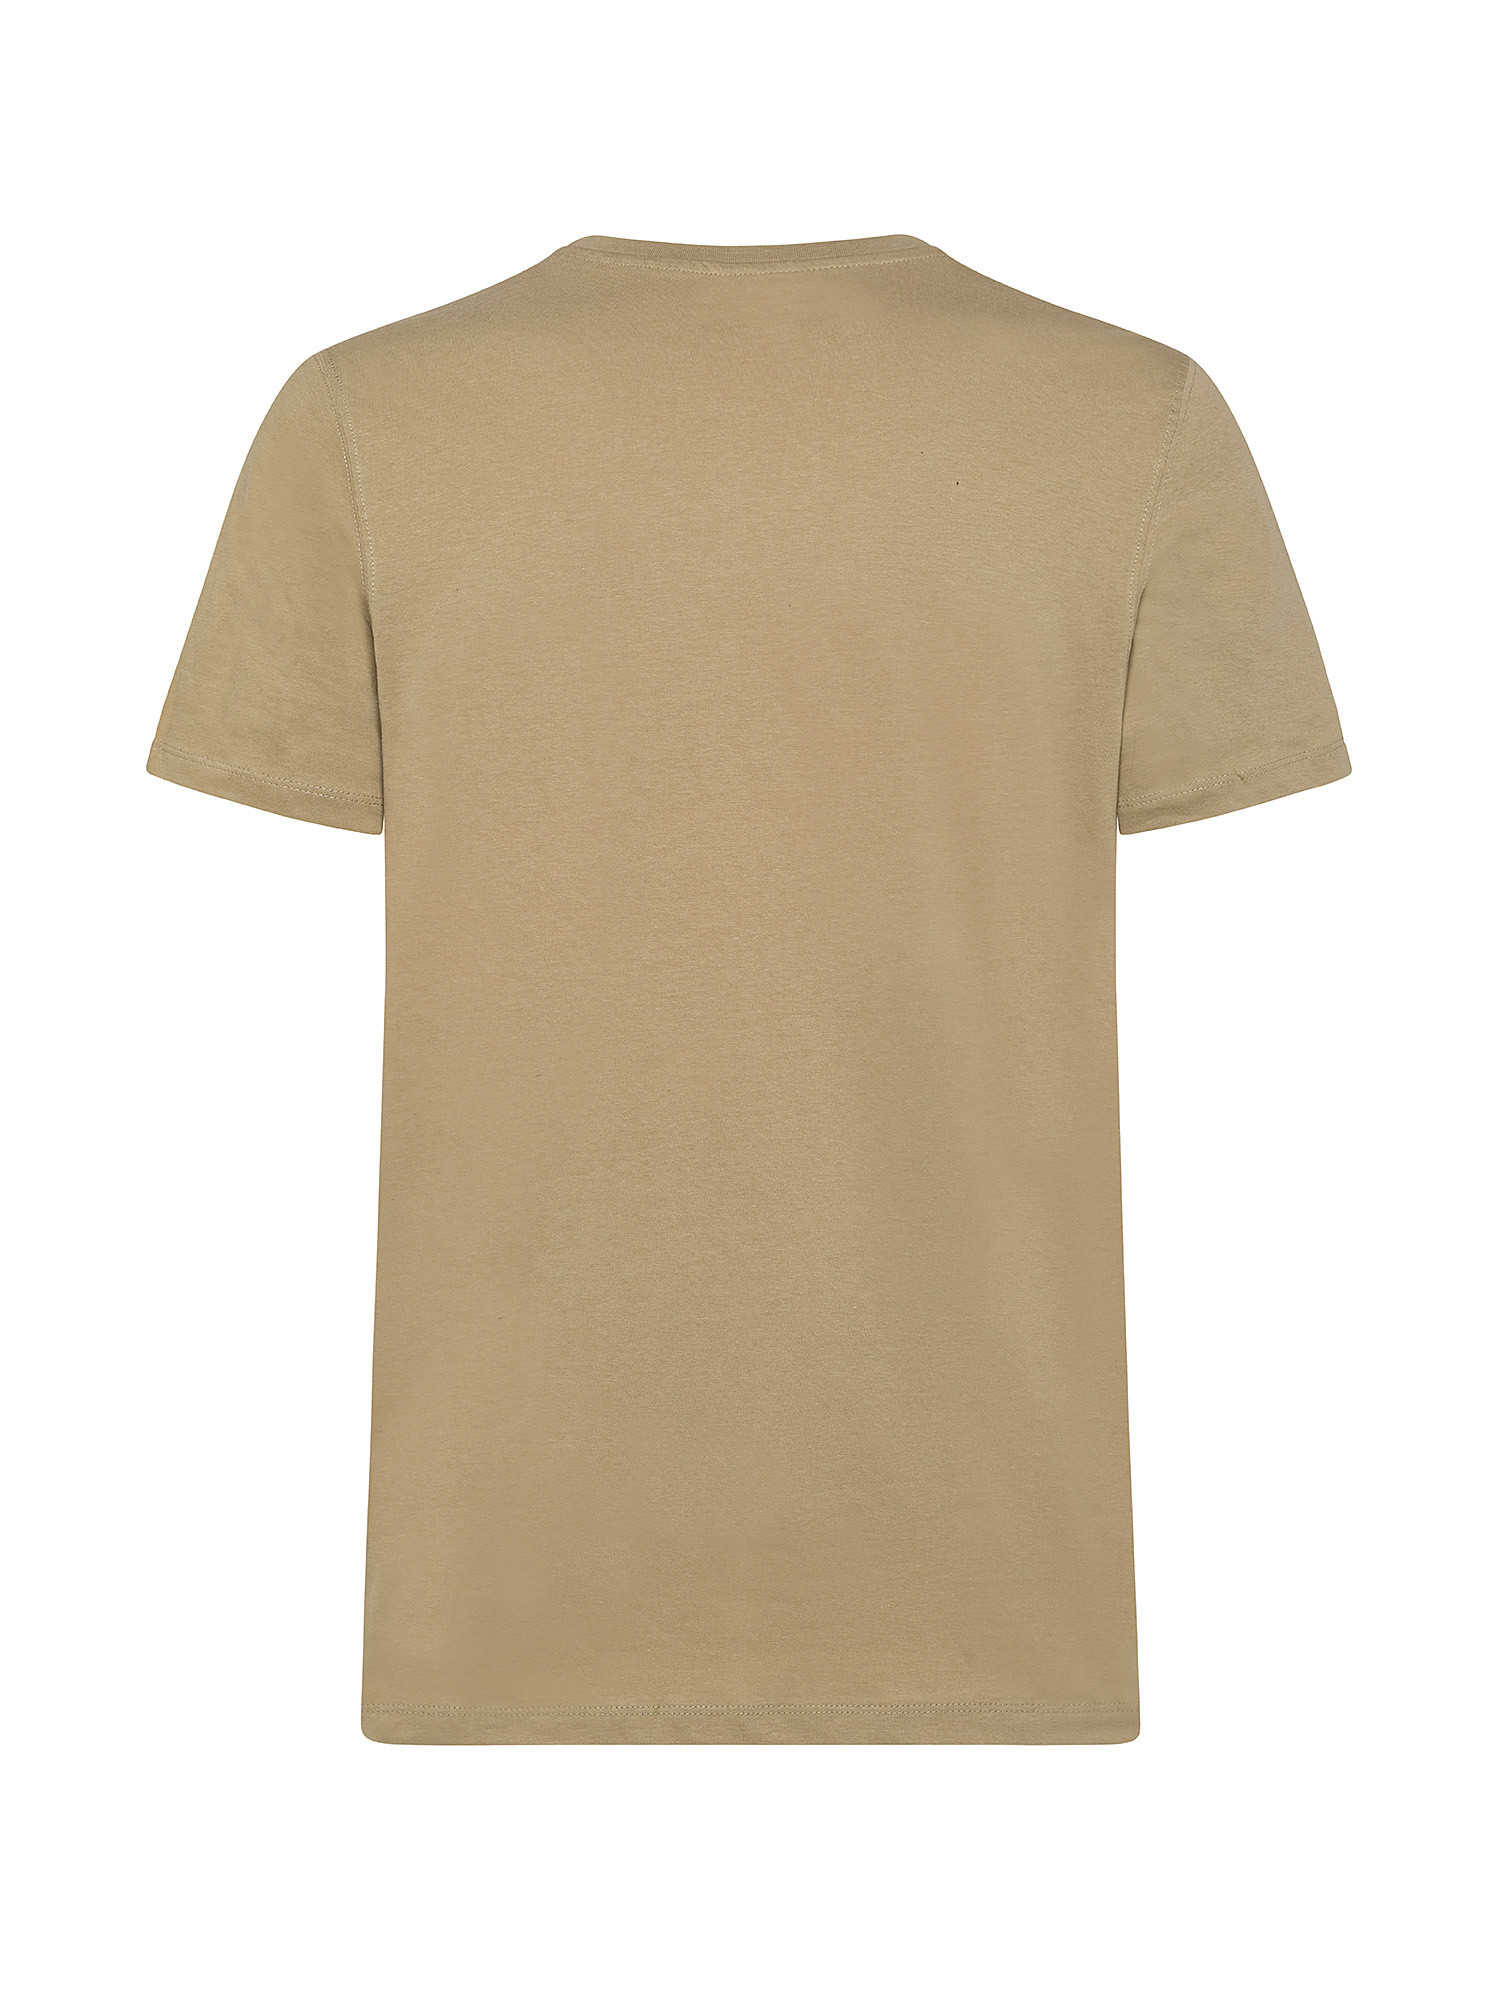 T-shirt con stampa, Beige, large image number 1